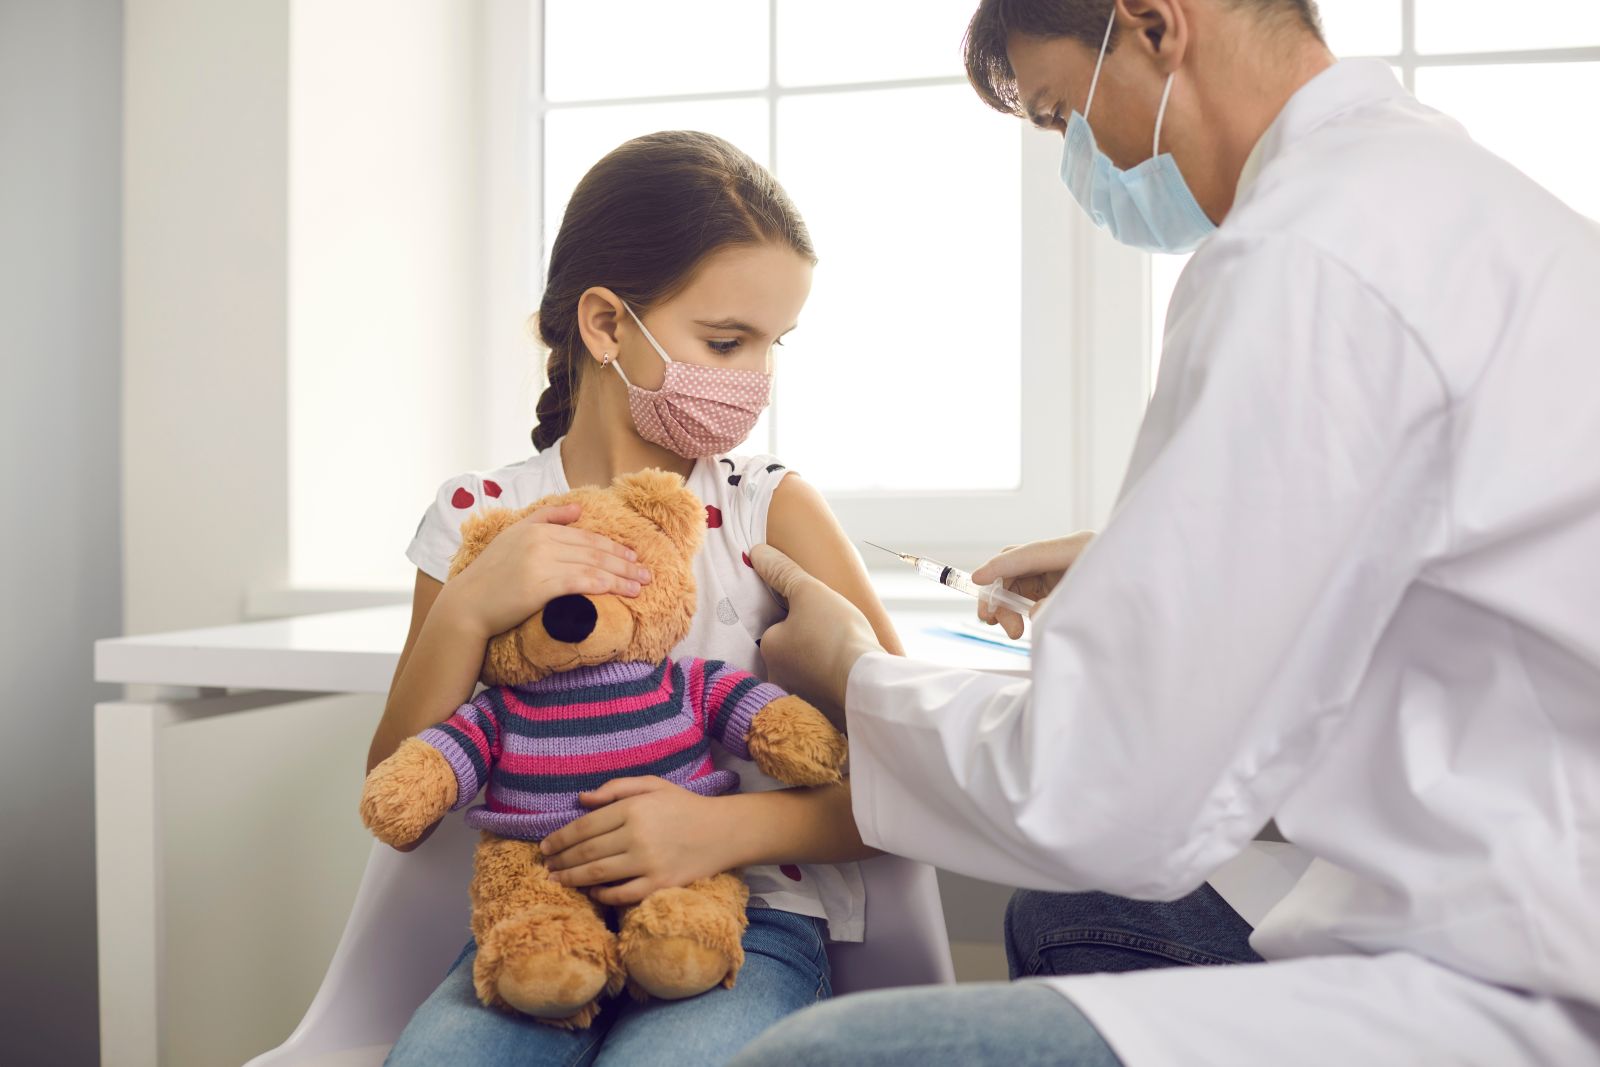 Young girl wearing facemask and holding teddy receives vaccination from doctor